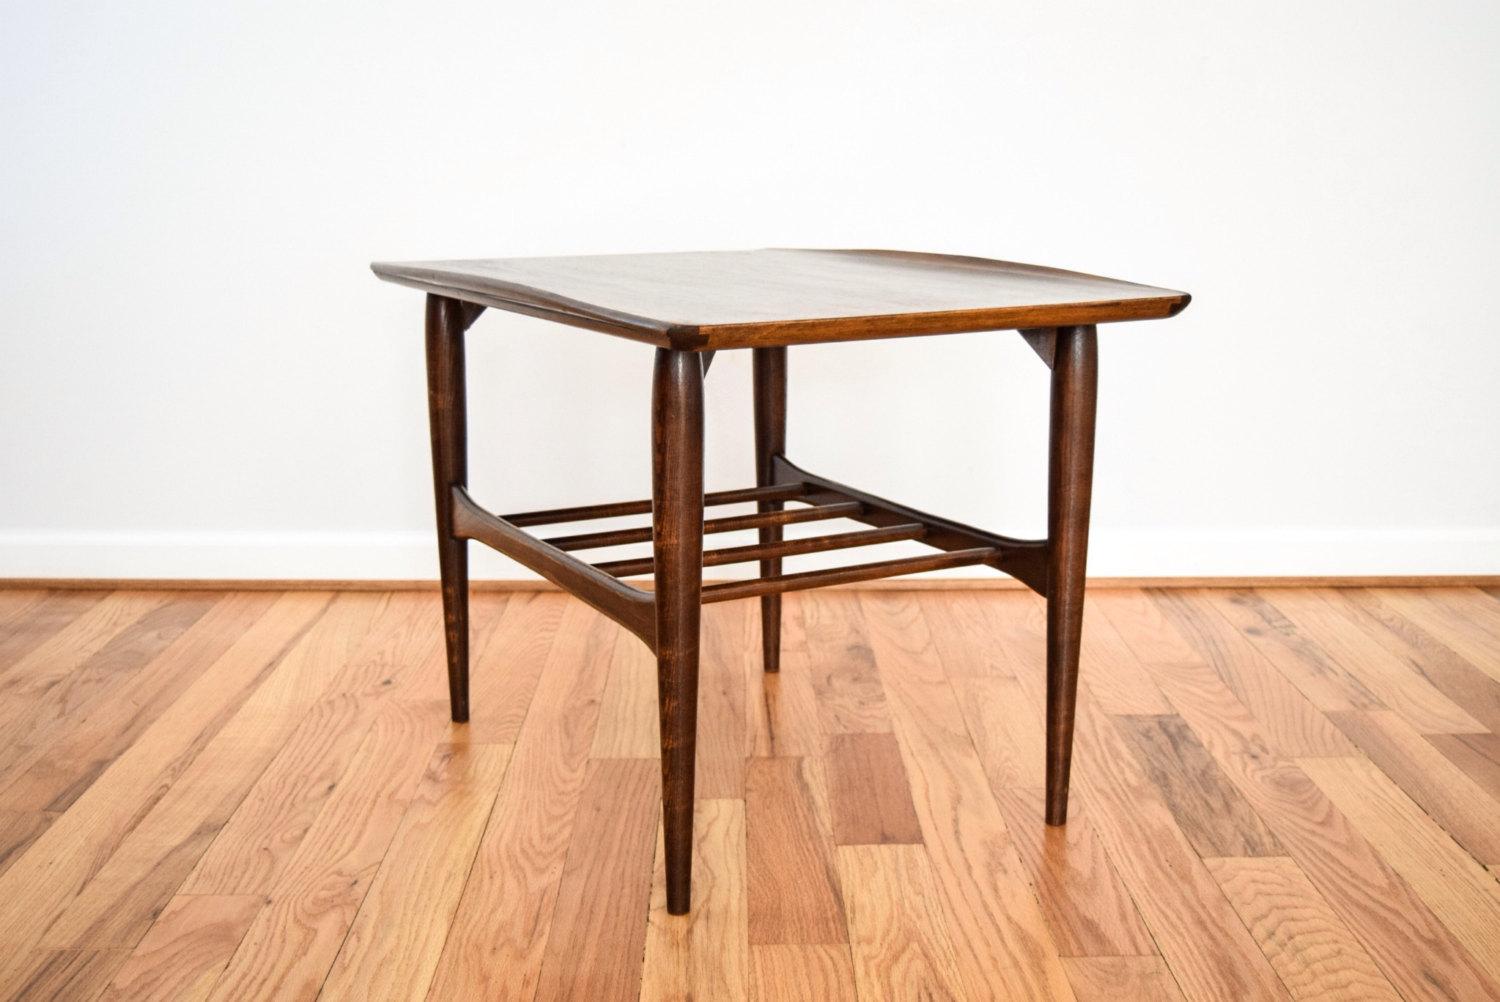 • Mid-Century Modern Bassett Artisan collection end table from the 1950s.
• Classic Danish-inspired American midcentury design in the style of Grete Jalk for Glostrup.
• Solid walnut construction with gorgeous wood grain.
• Beautiful design